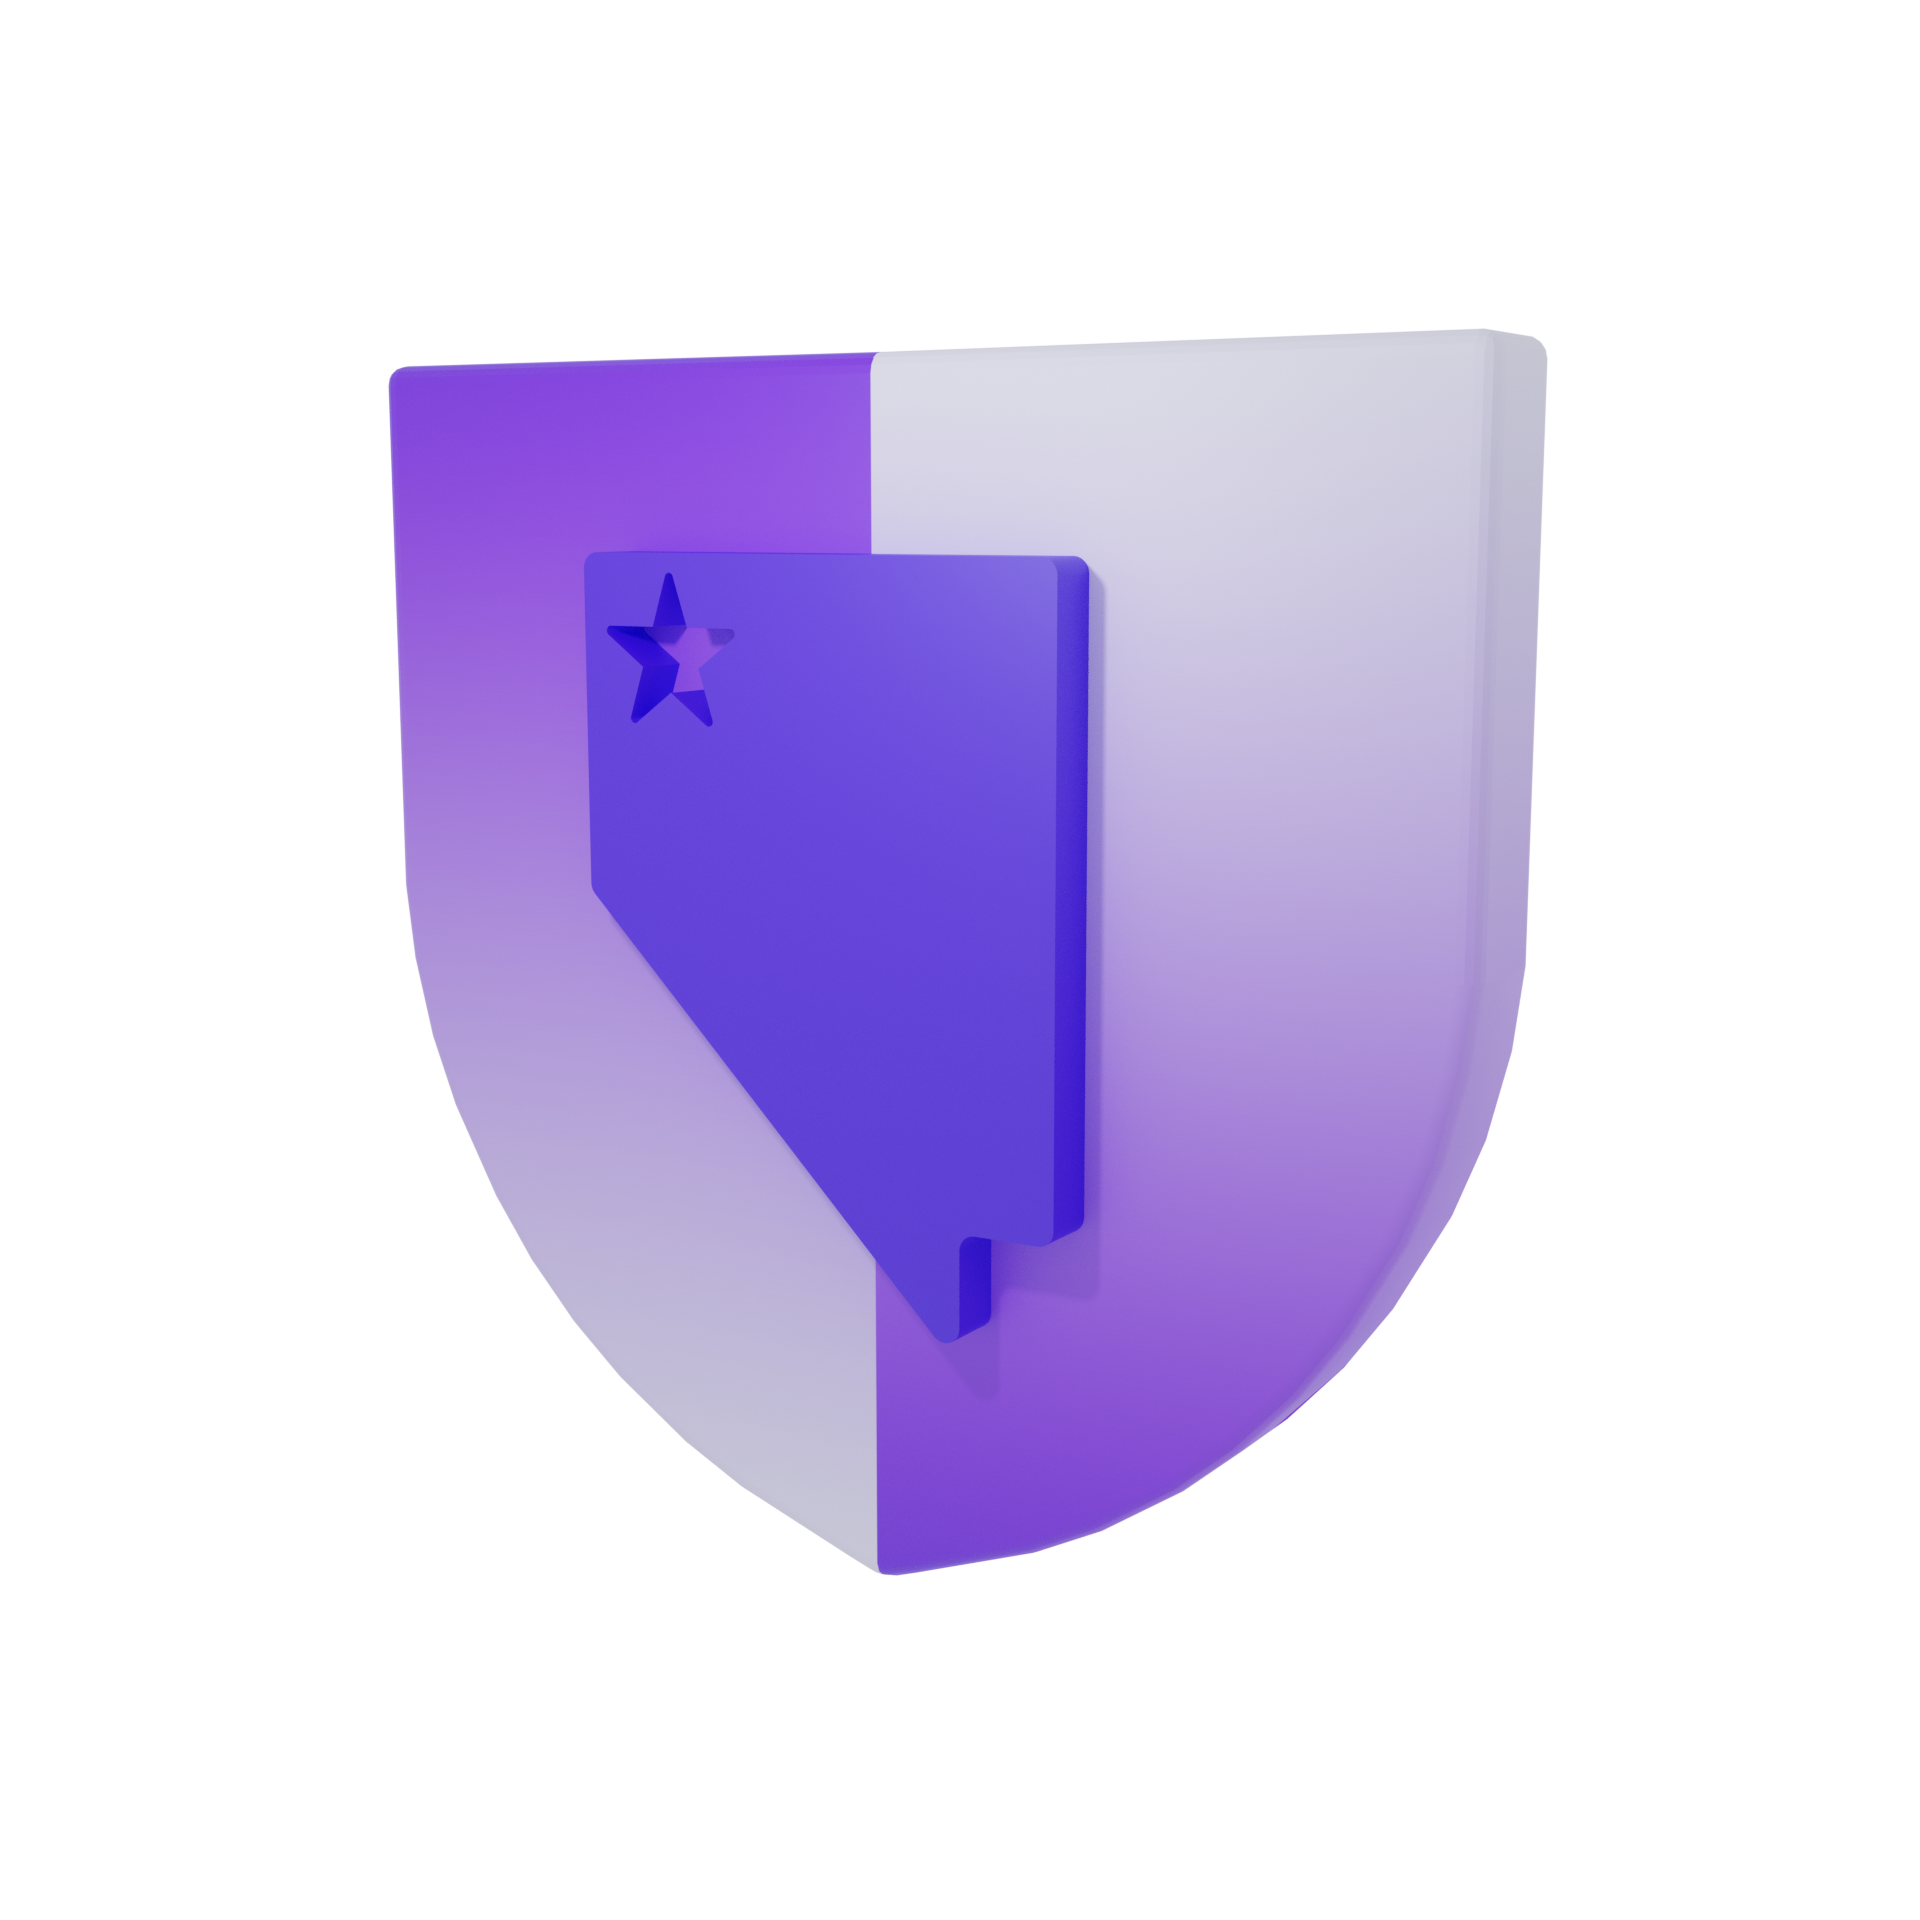 Shield with an outline of the state of Nevada